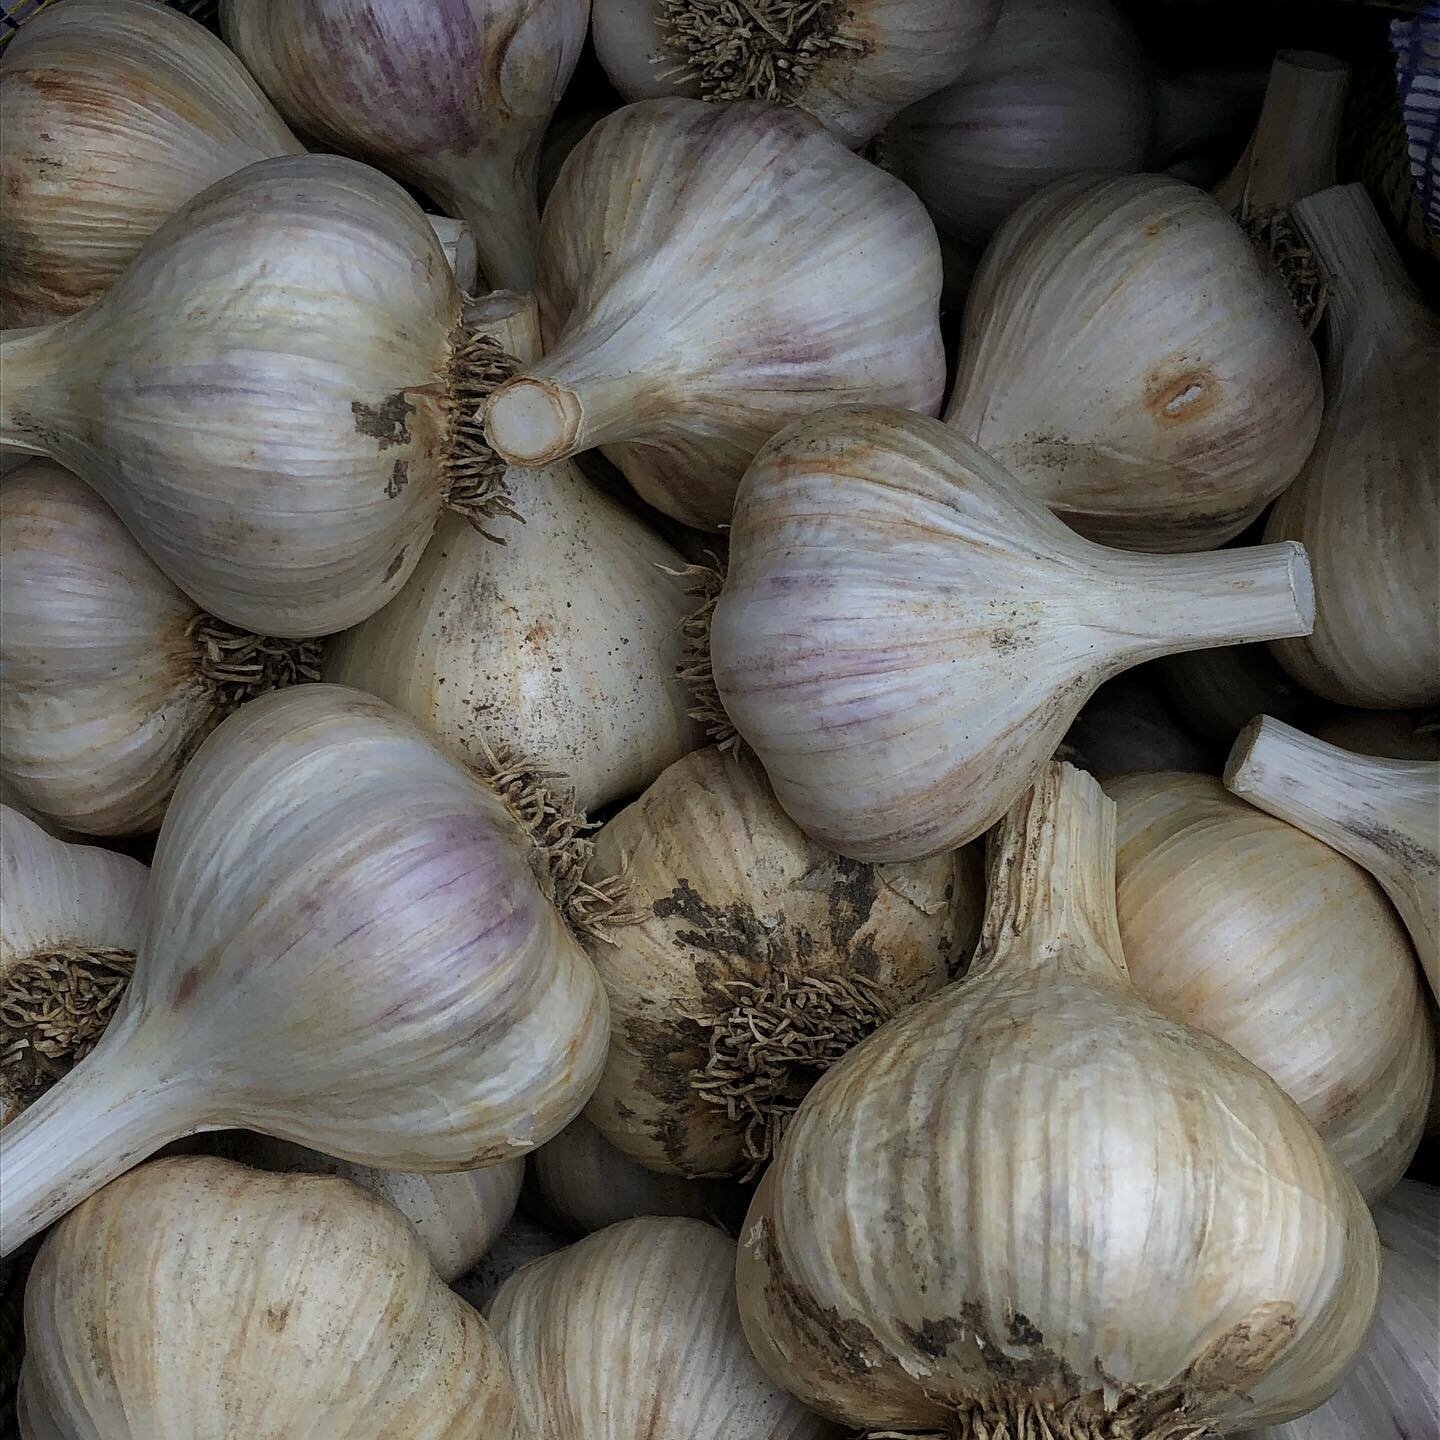 Hey folks. Going to be putting our garlic up for sale on the website in the next couple of days. Will give a shout when it&rsquo;s live. Thanks for looking!! #garlic #seed #garden #grw